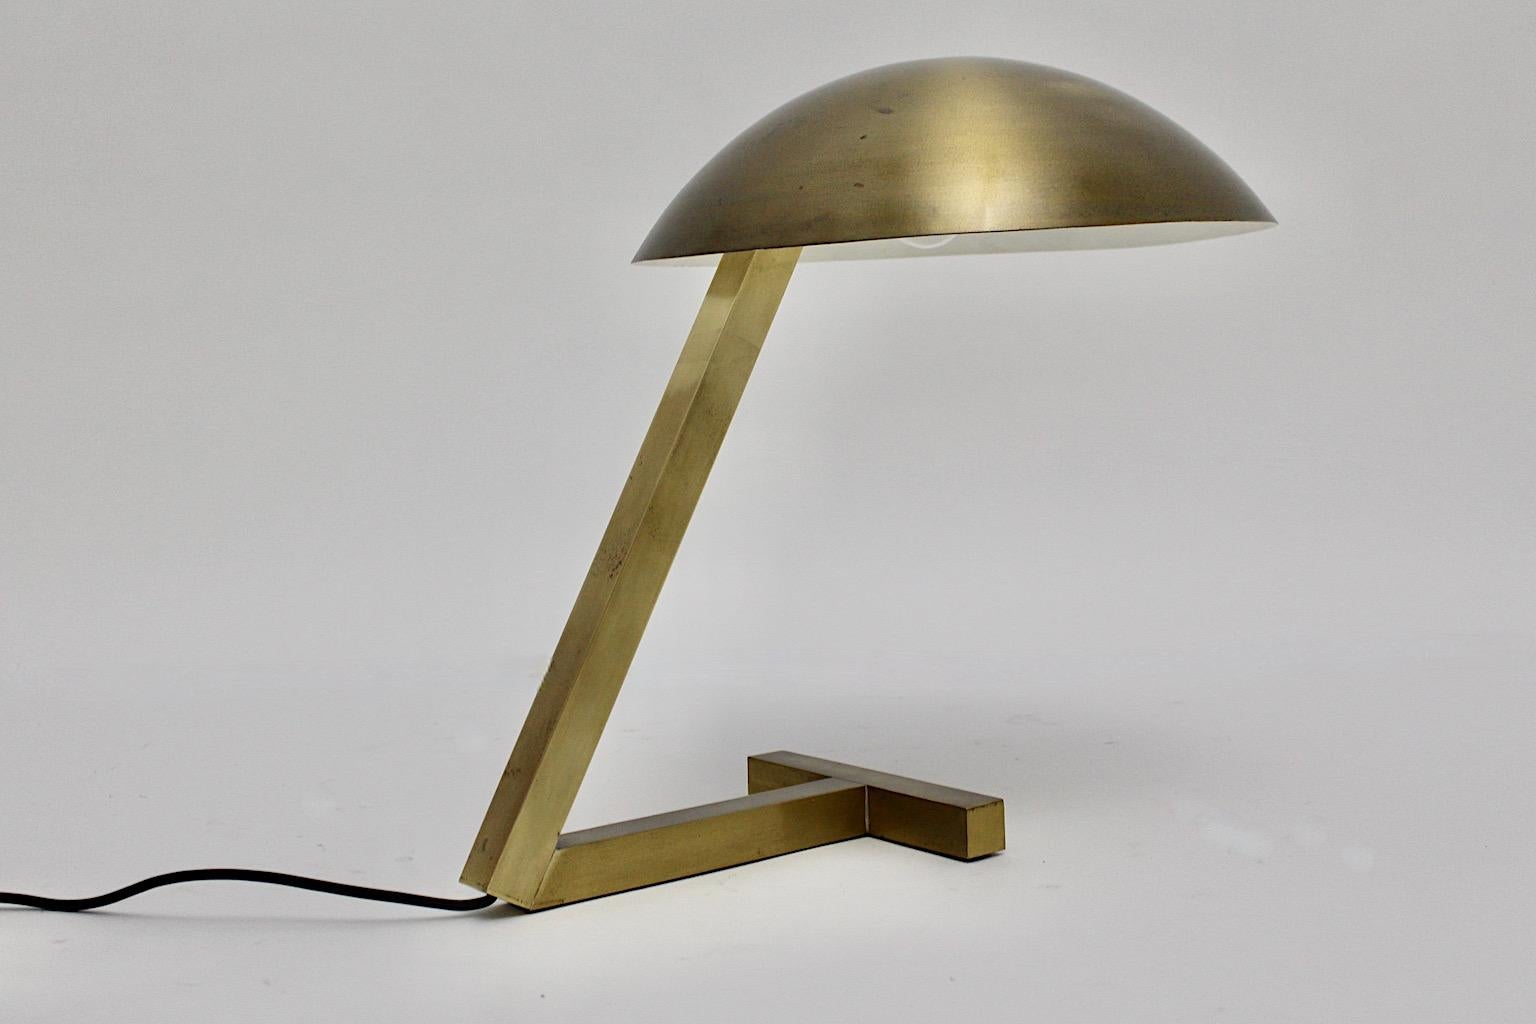 Italian Space Age Brass Vintage Dome Geometric Table Lamp Desk Lamp 1960s Italy For Sale